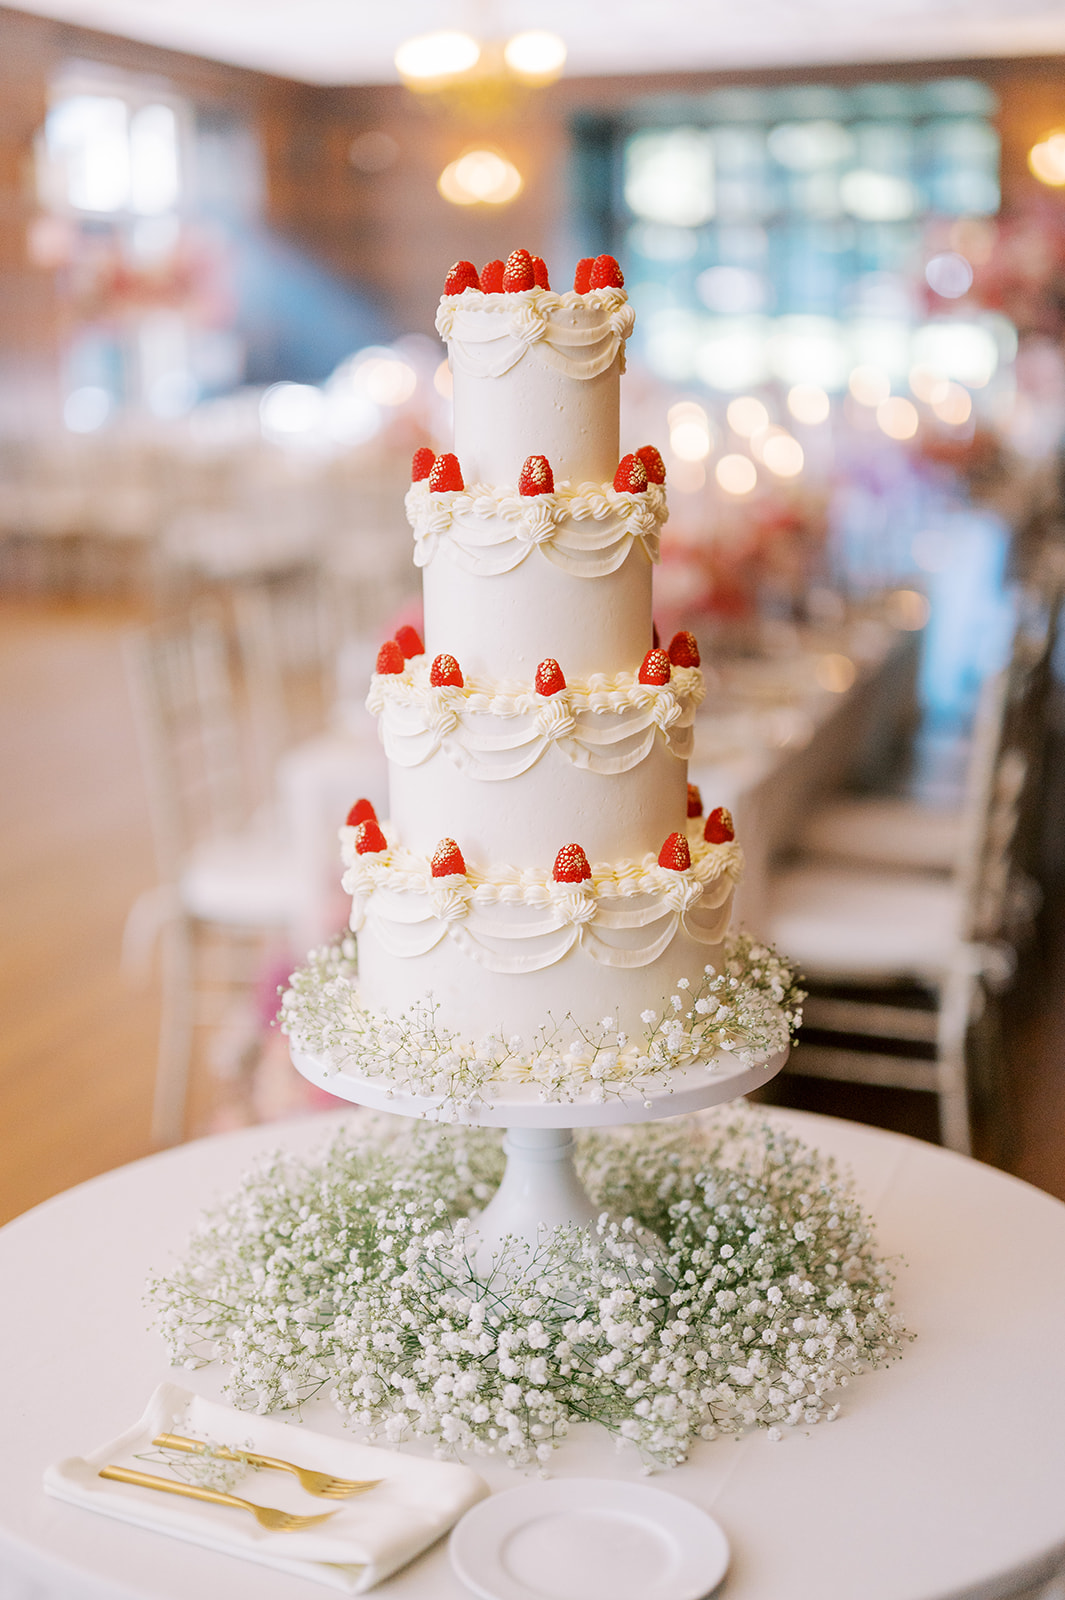 traditional white wedding cake topped with cherries for Timeless Summer Wedding at Parque at Historic Hunting Hill Mansi